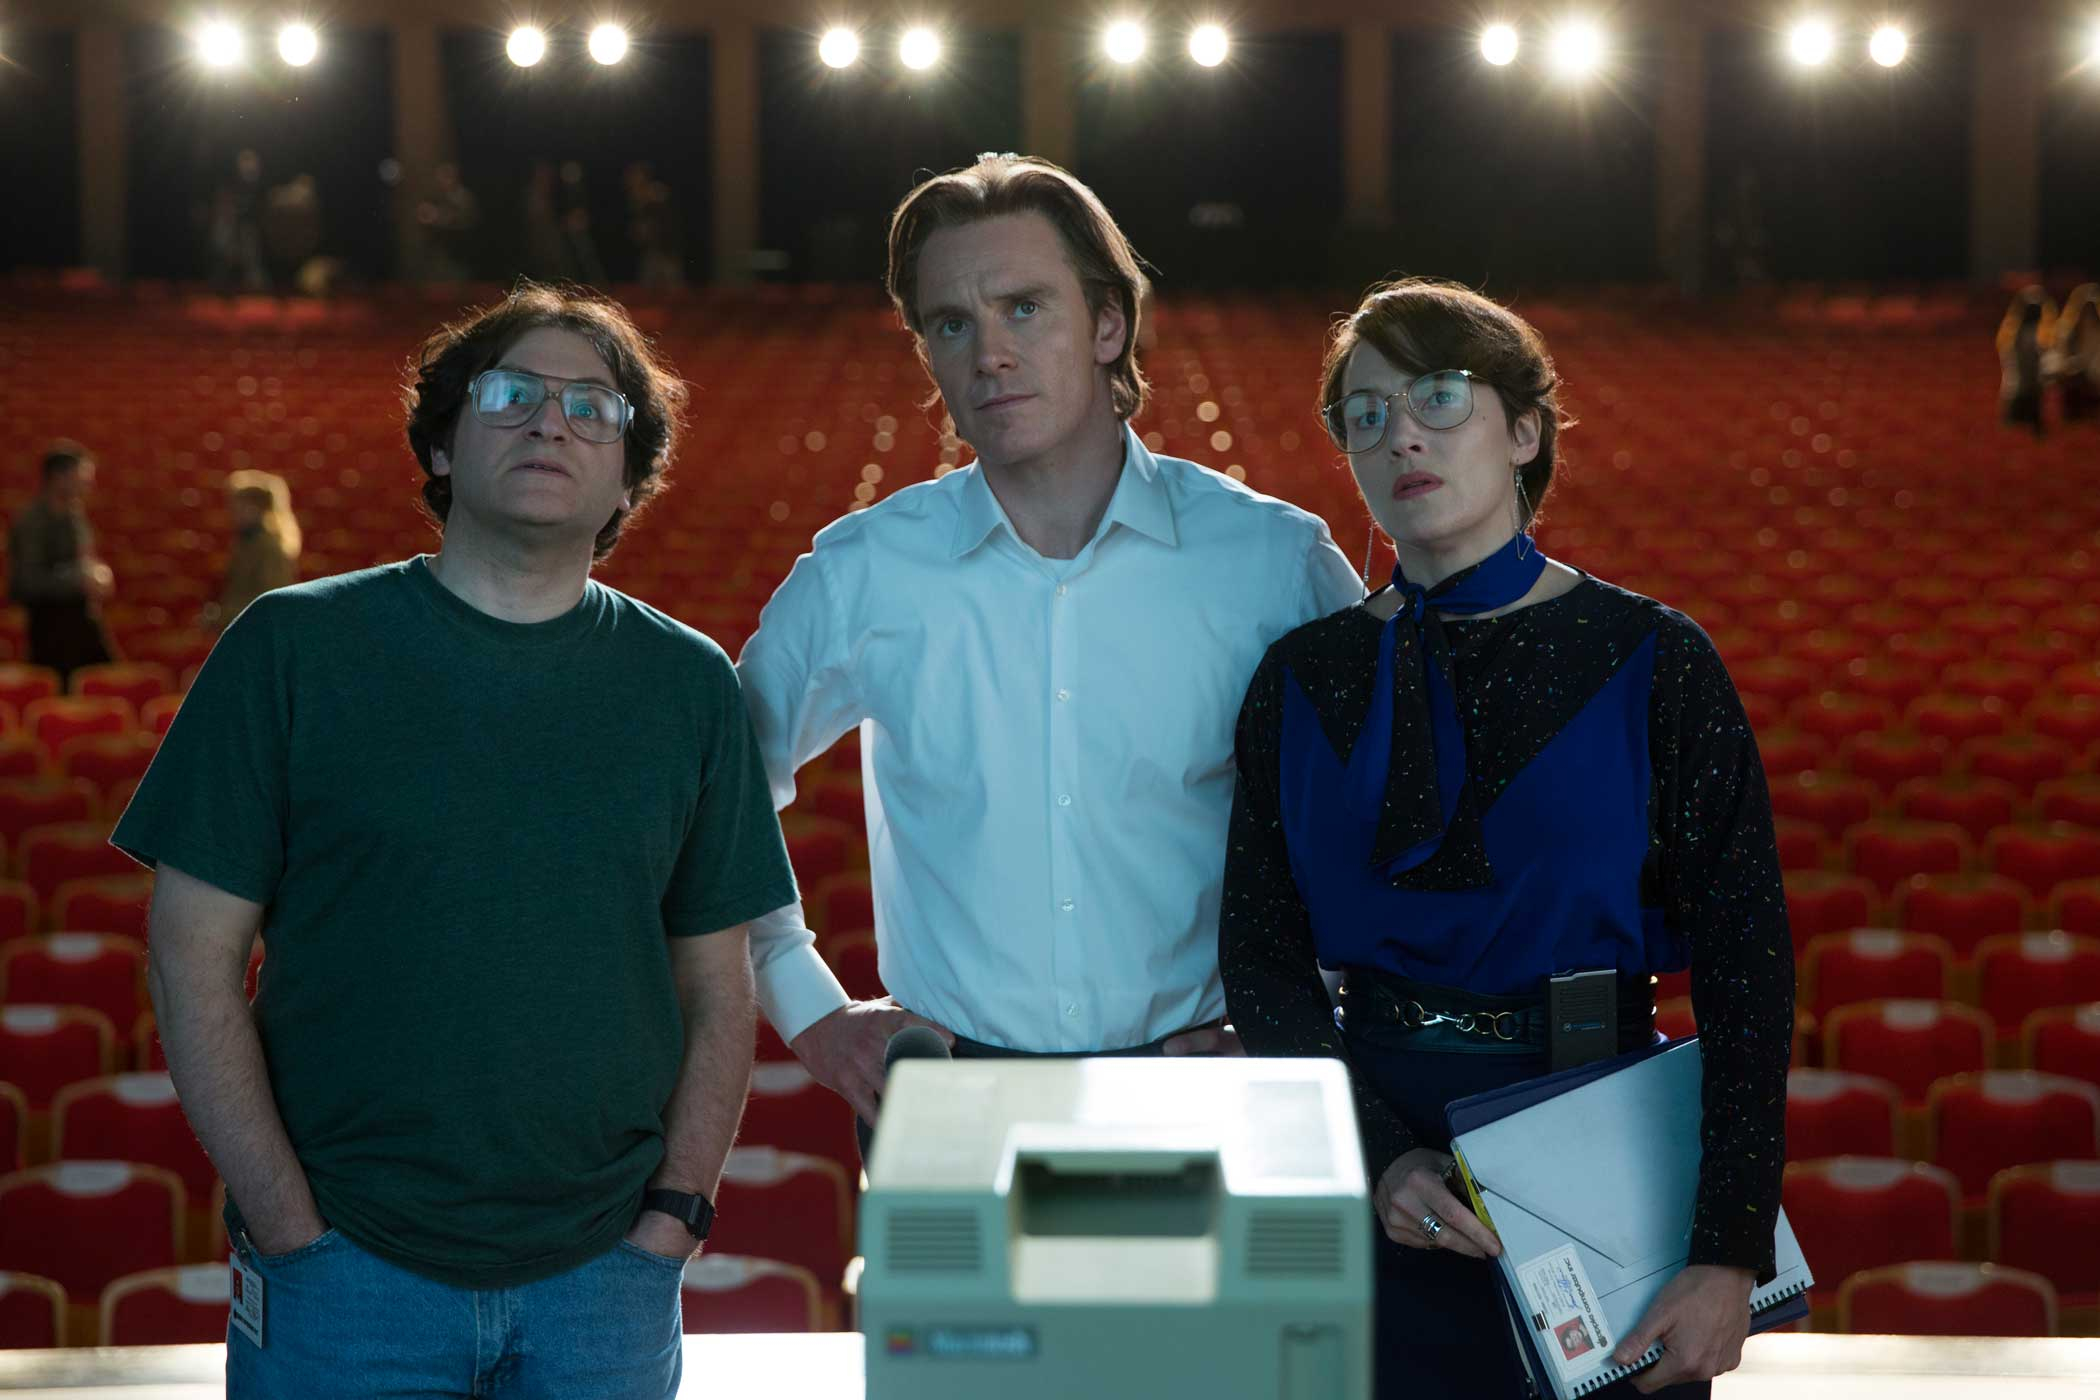 From left to right: Andy Hertzfeld (Michael Stalberg), Steve Jobs (Michael Fassbender) and Joanna Hoffman (Kate Winslet).